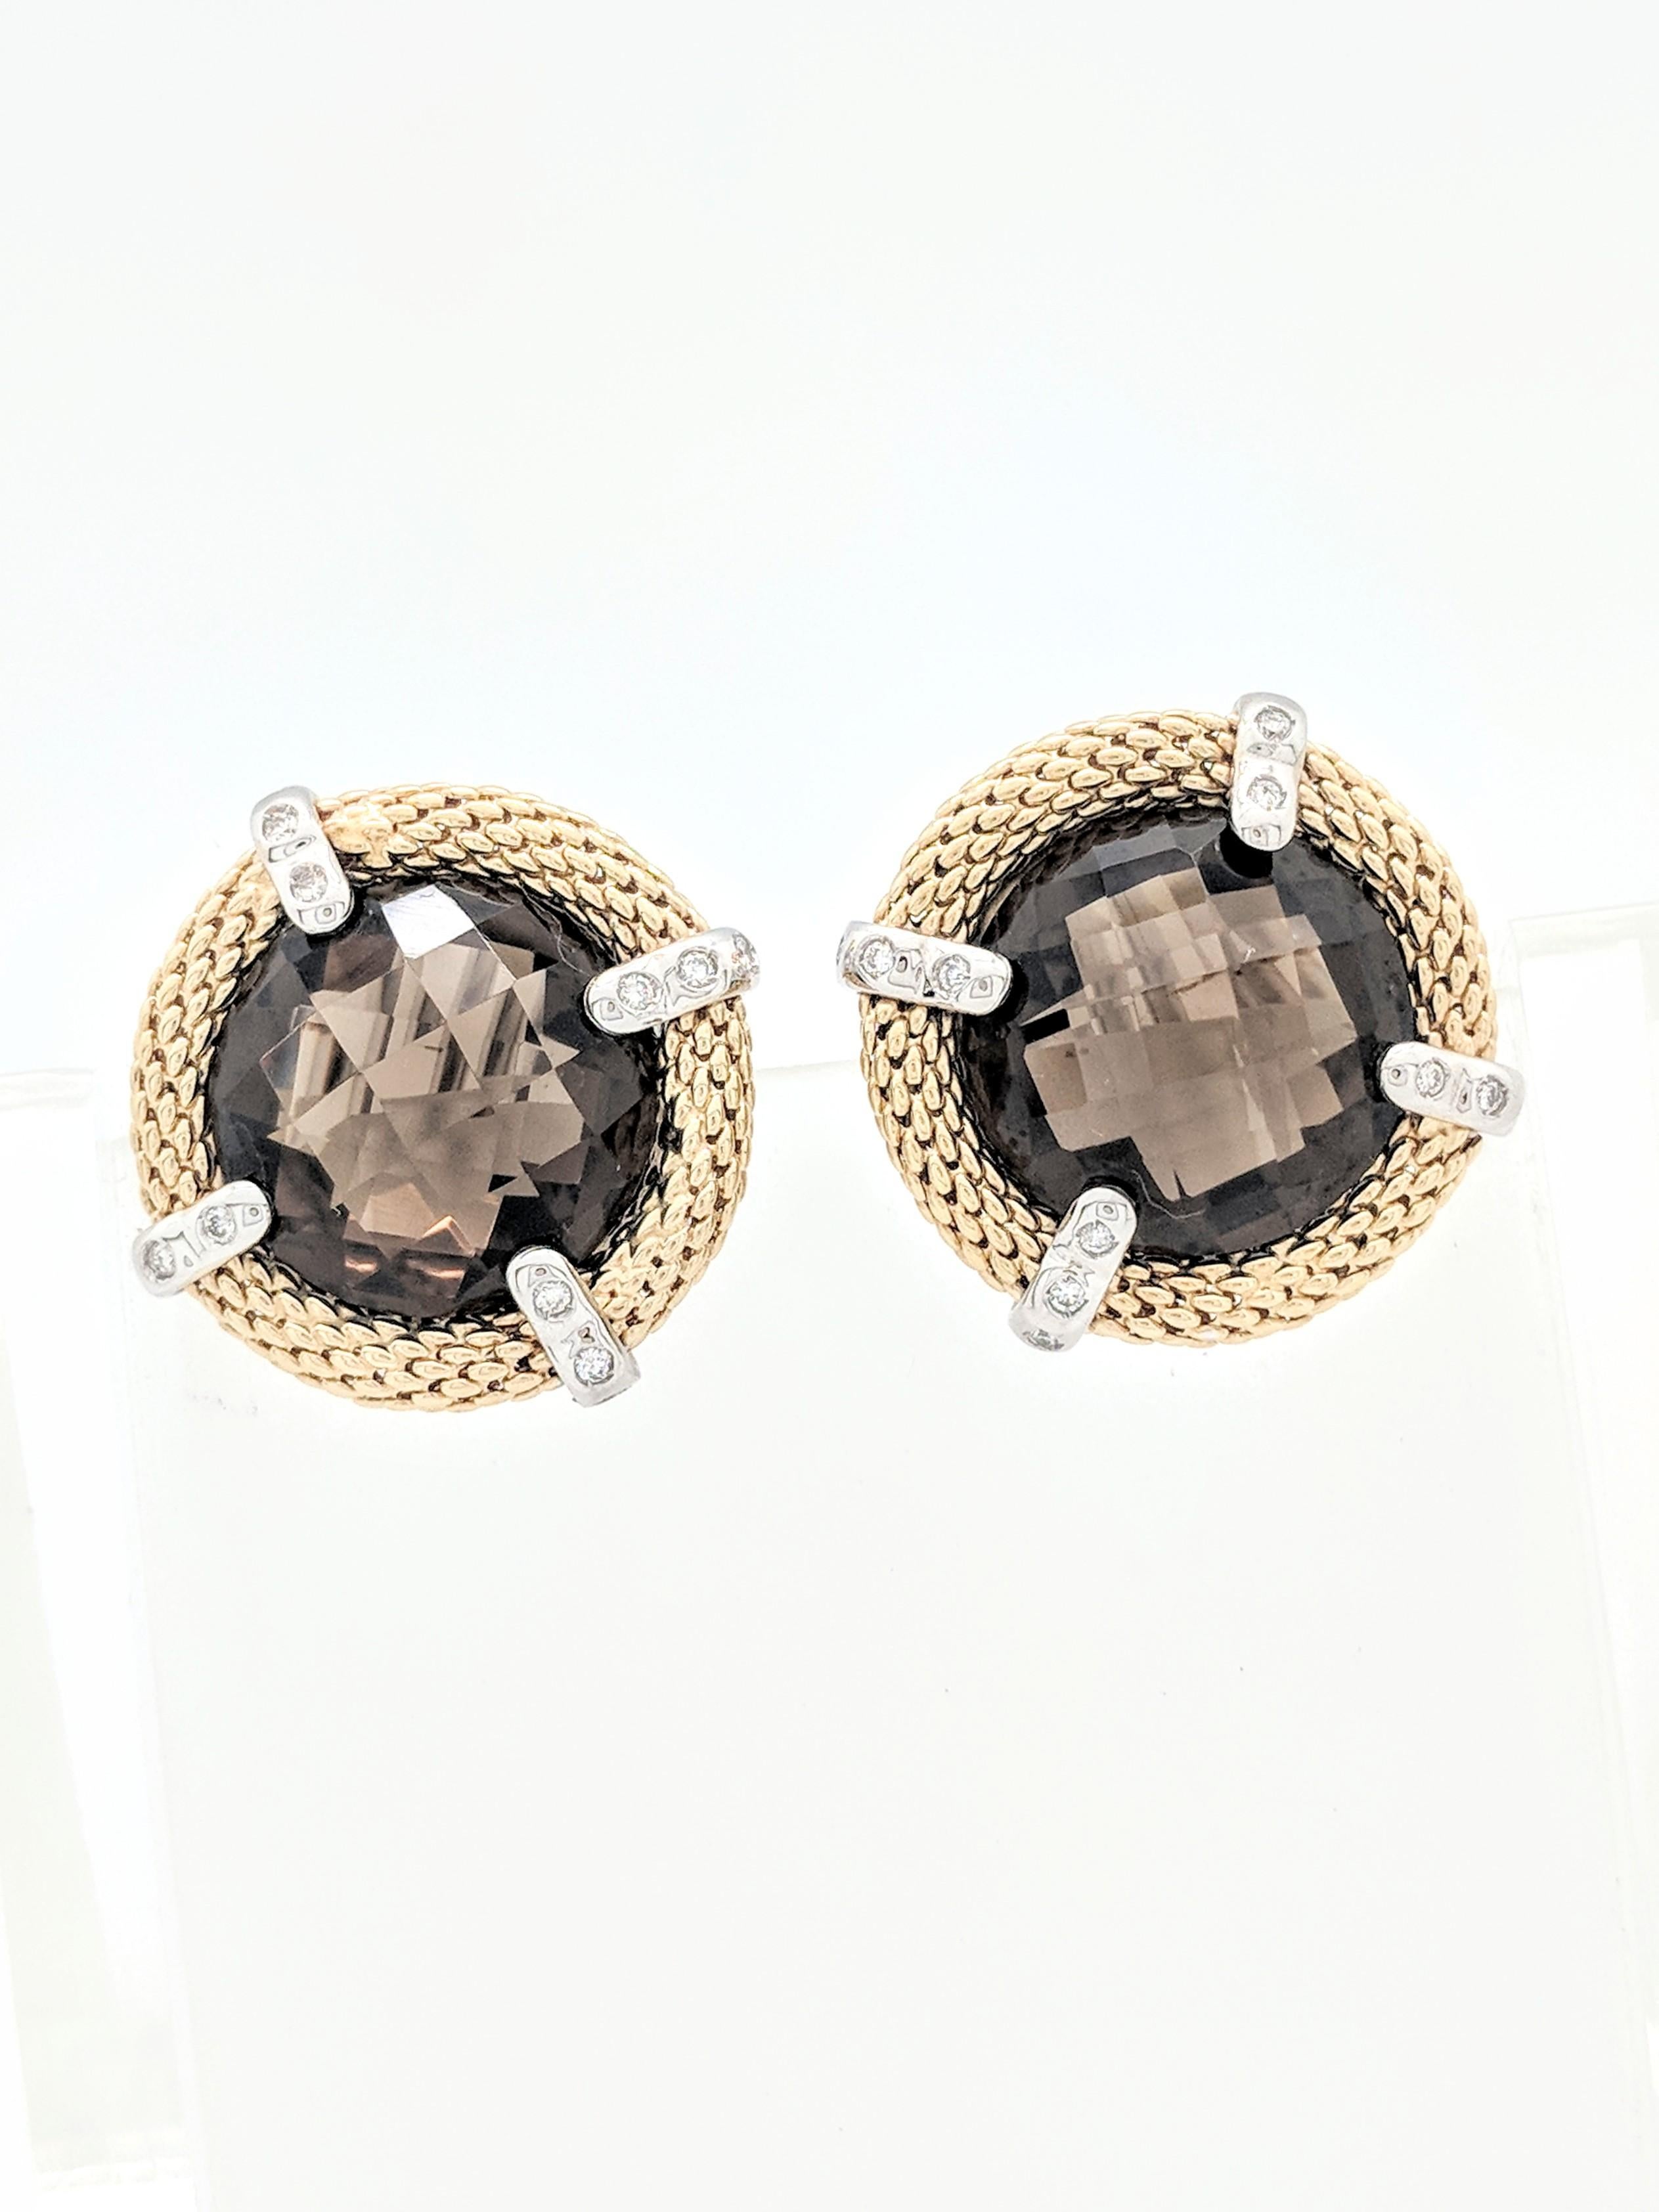 You are viewing a beautiful pair of smoky quartz and diamond earrings. Any woman would love to add this pair to their collection! These earrings are crafted from 14k yellow and white gold and they weigh 155 grams. They each feature (1) 16mm round